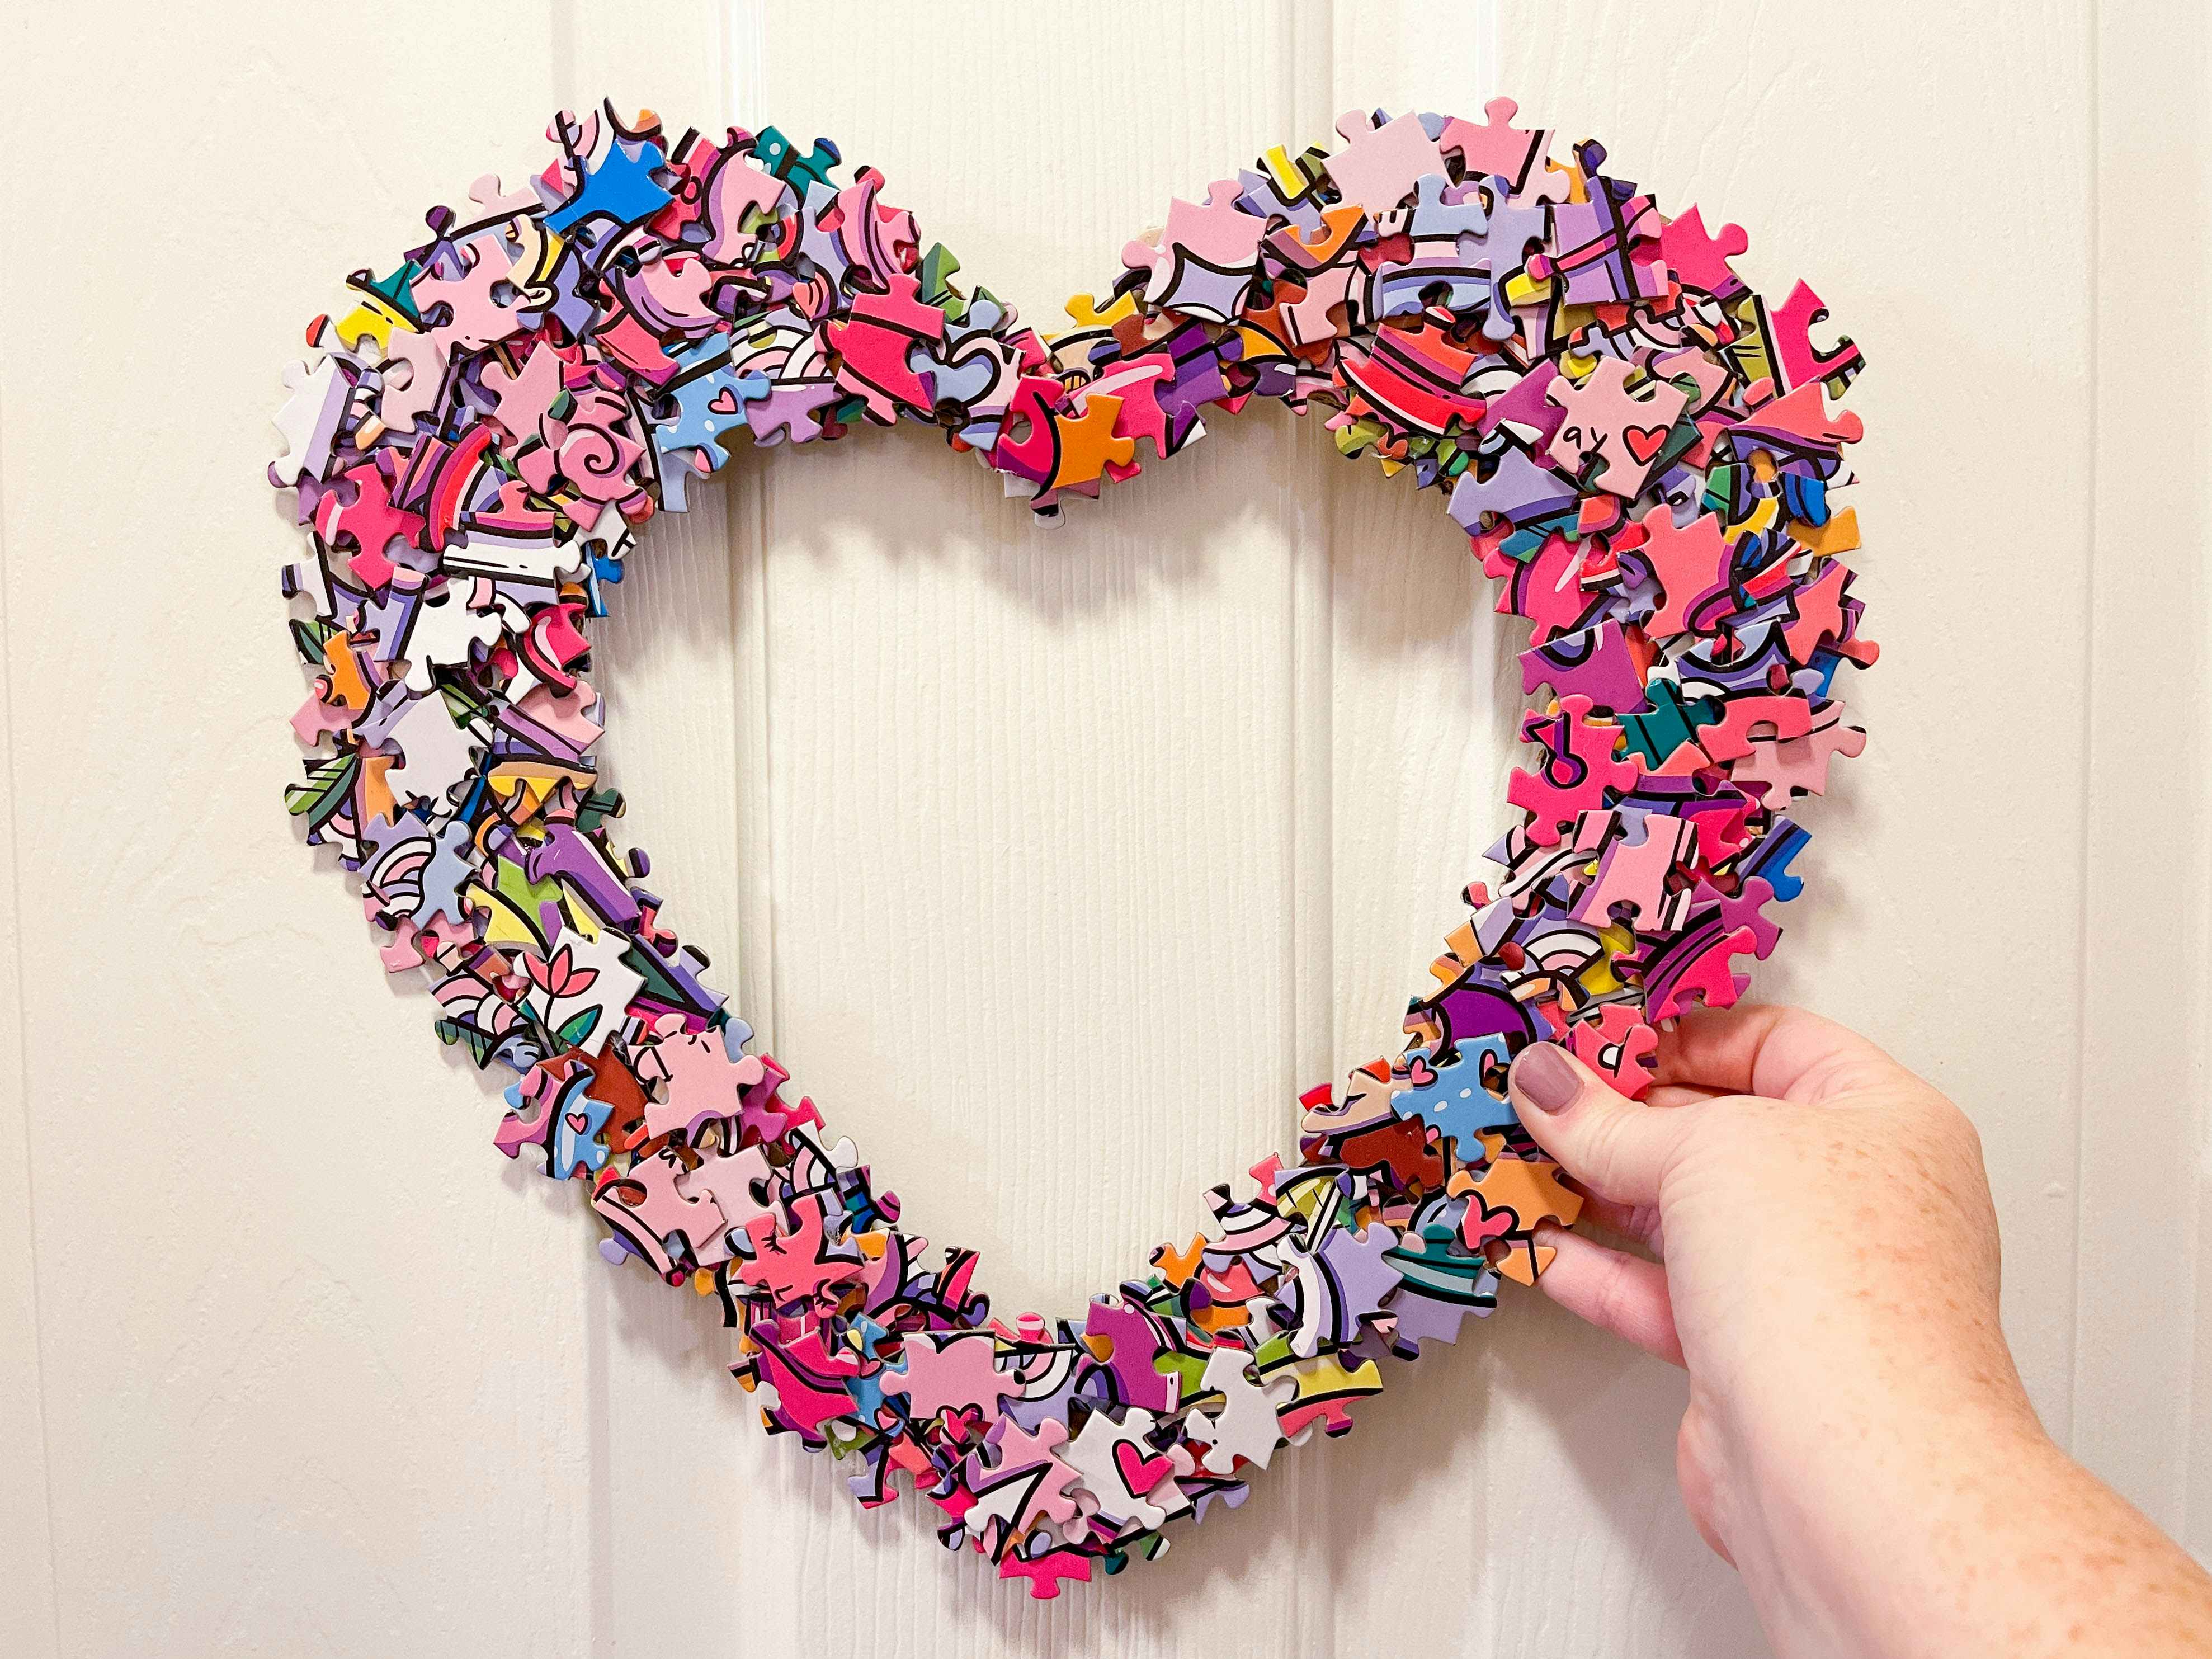 a heart puzzle wreath being held up